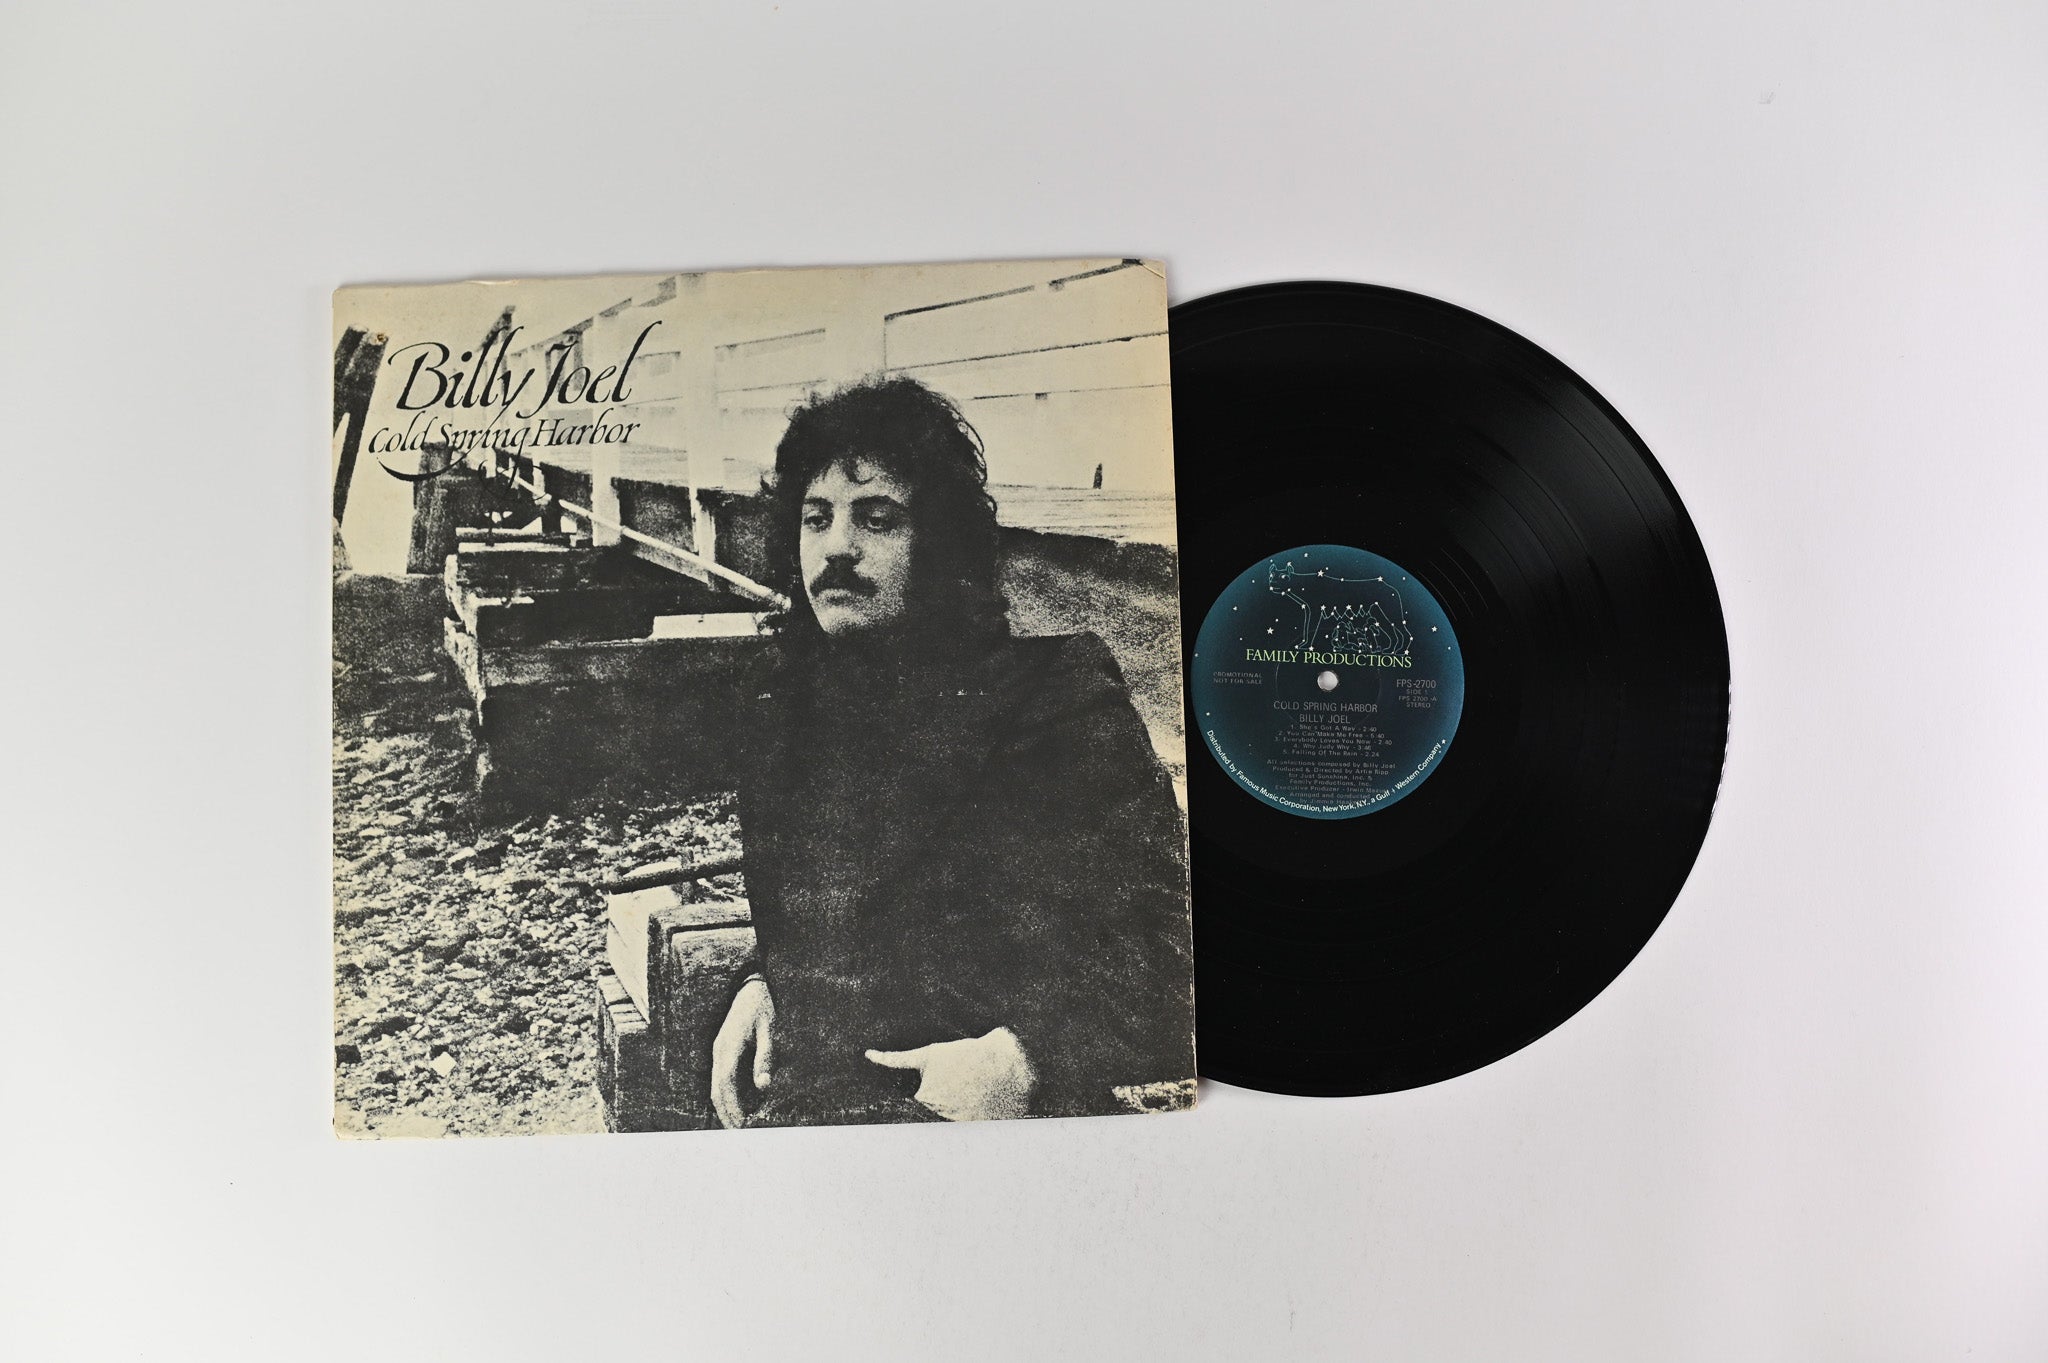 Billy Joel - Cold Spring Harbor on Family Productions Promo